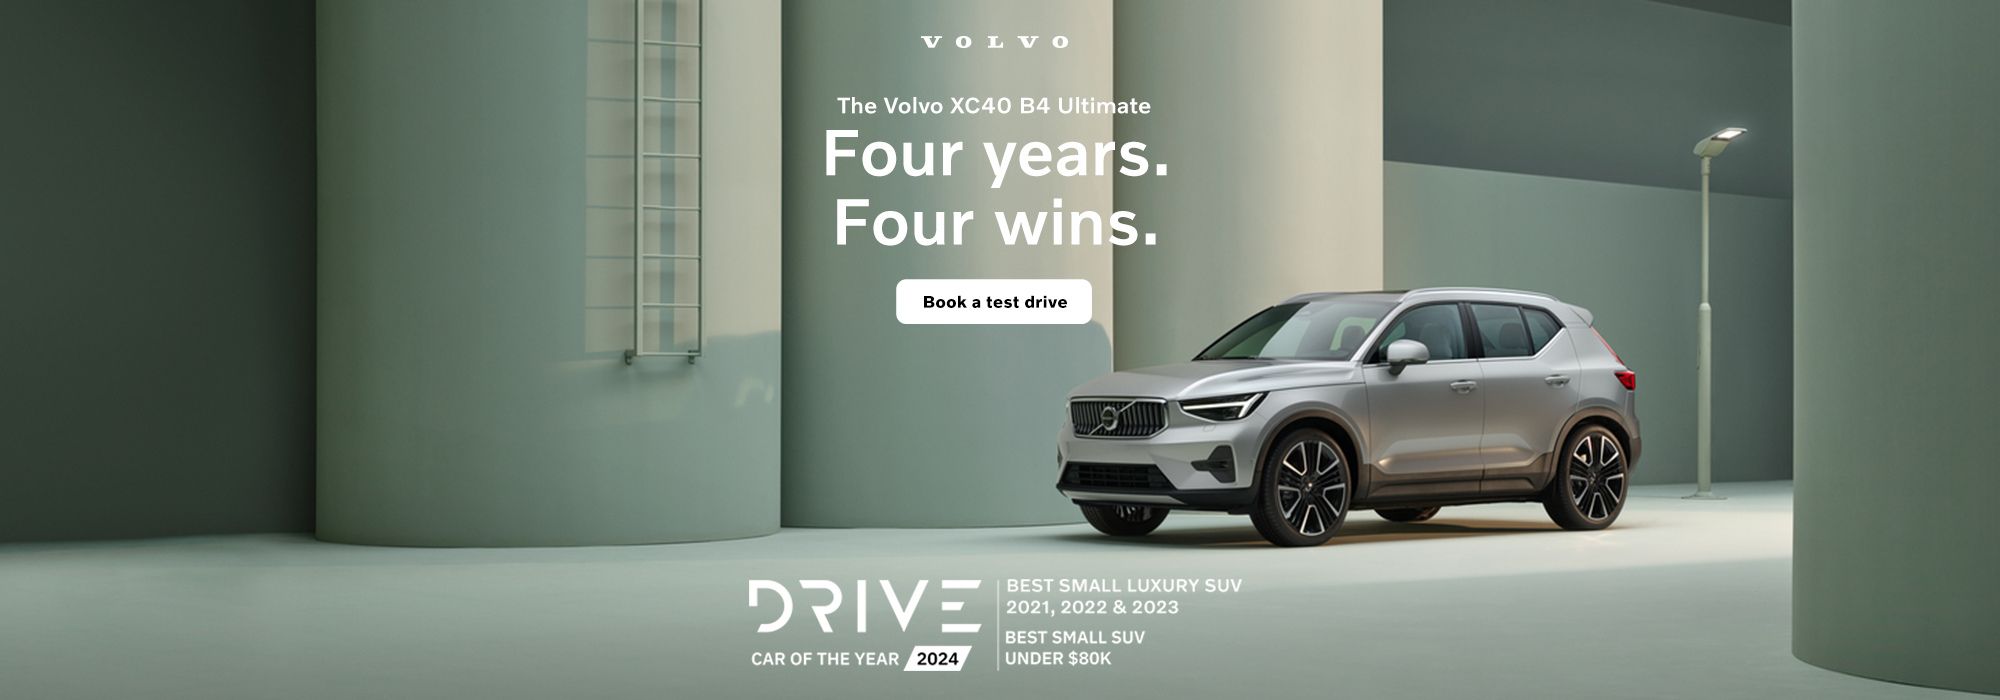 Volvo XC40 Four years. Four Wins.- Drive Car of the Year 2024